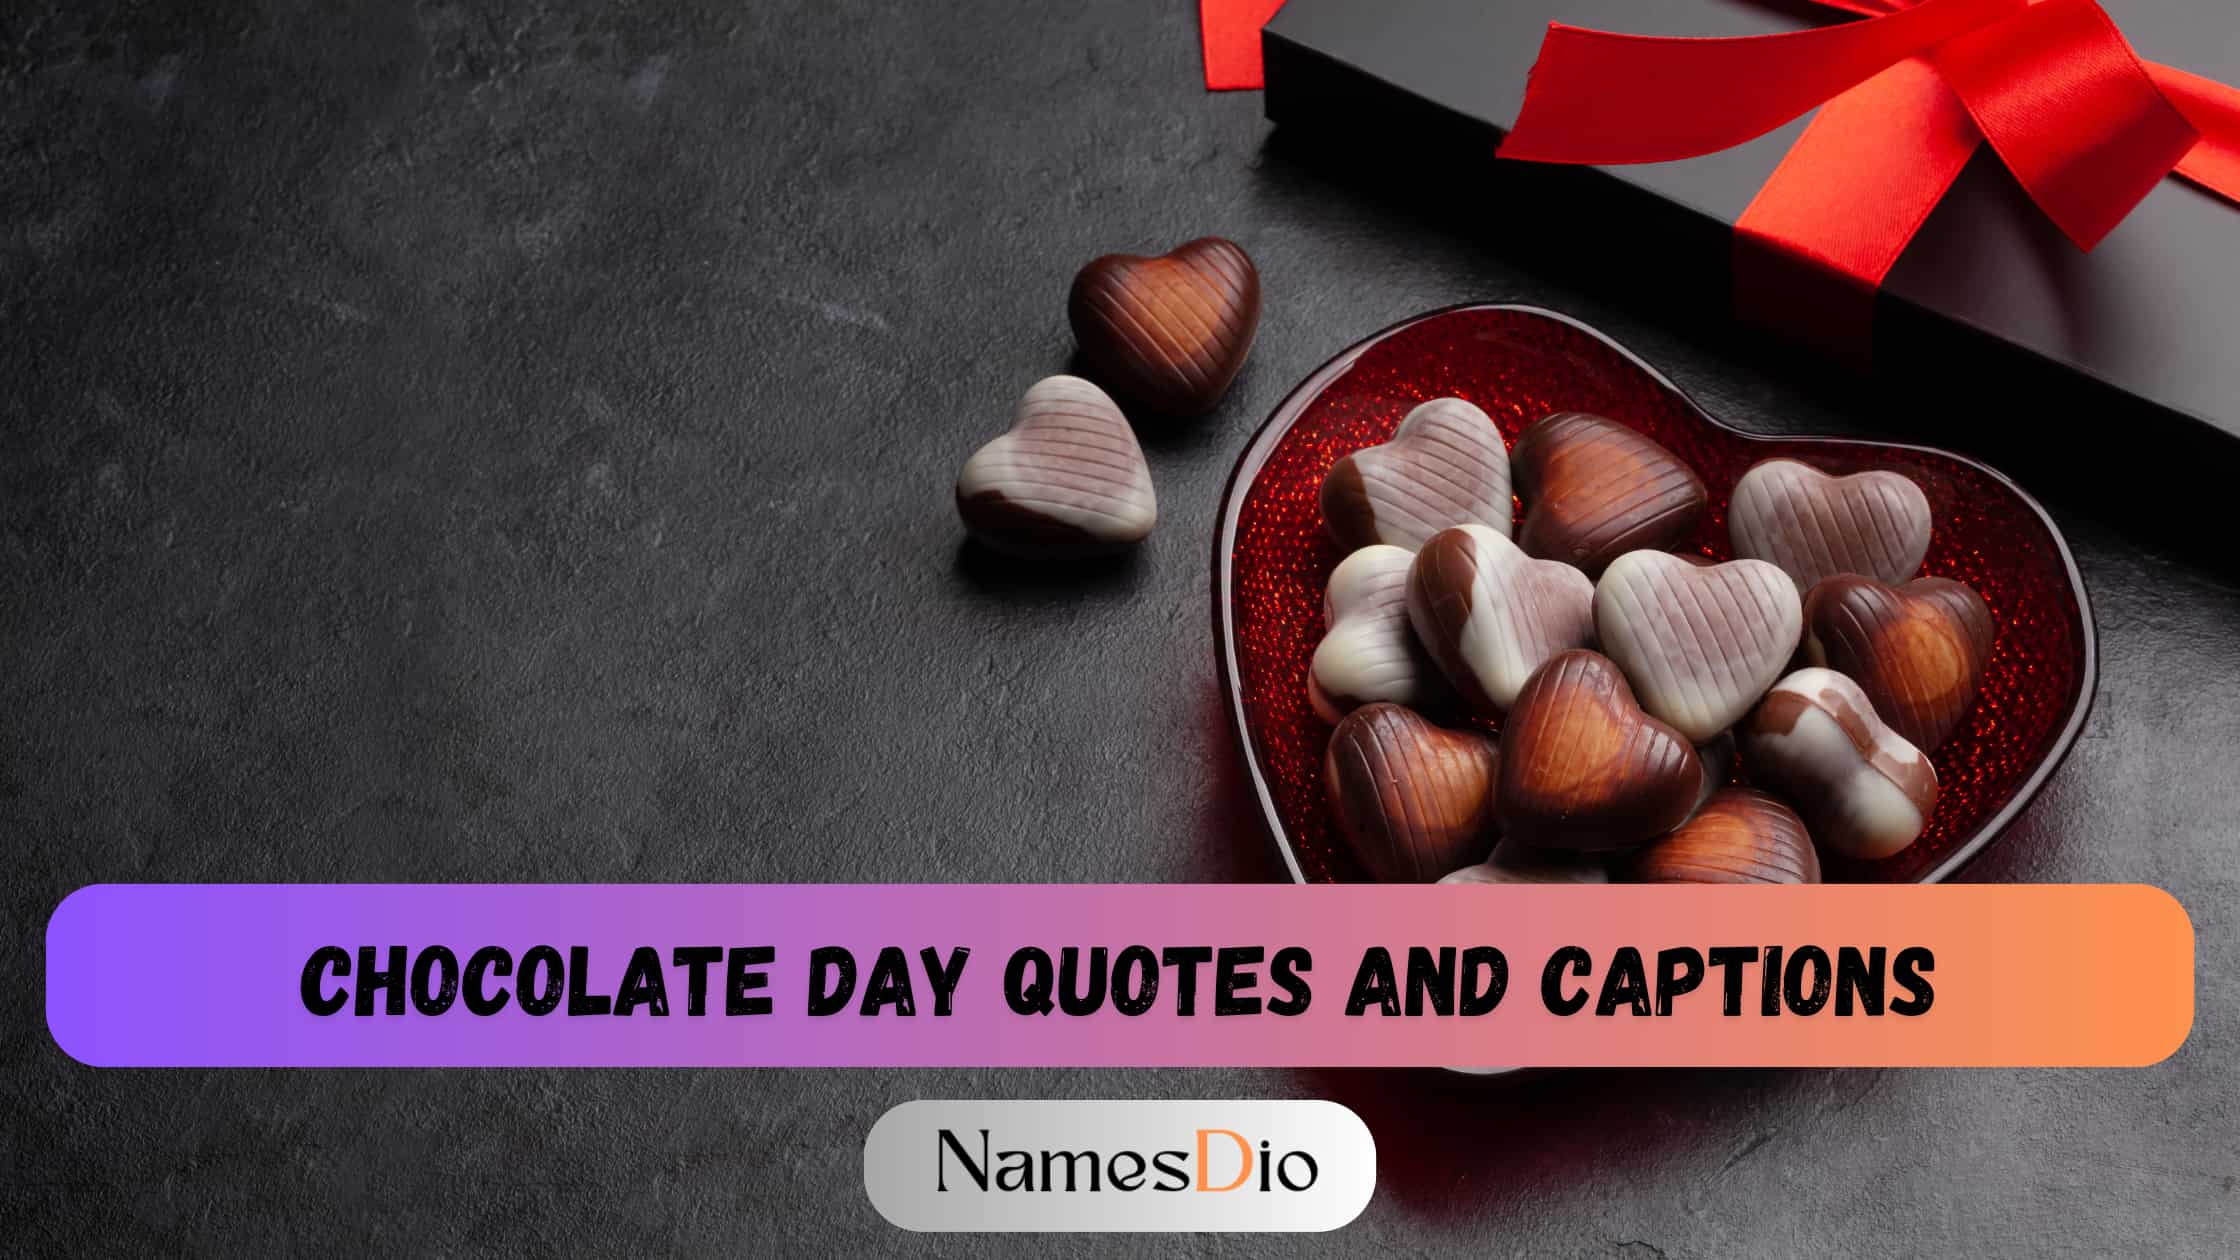 Chocolate-Day-Quotes-and-Captions